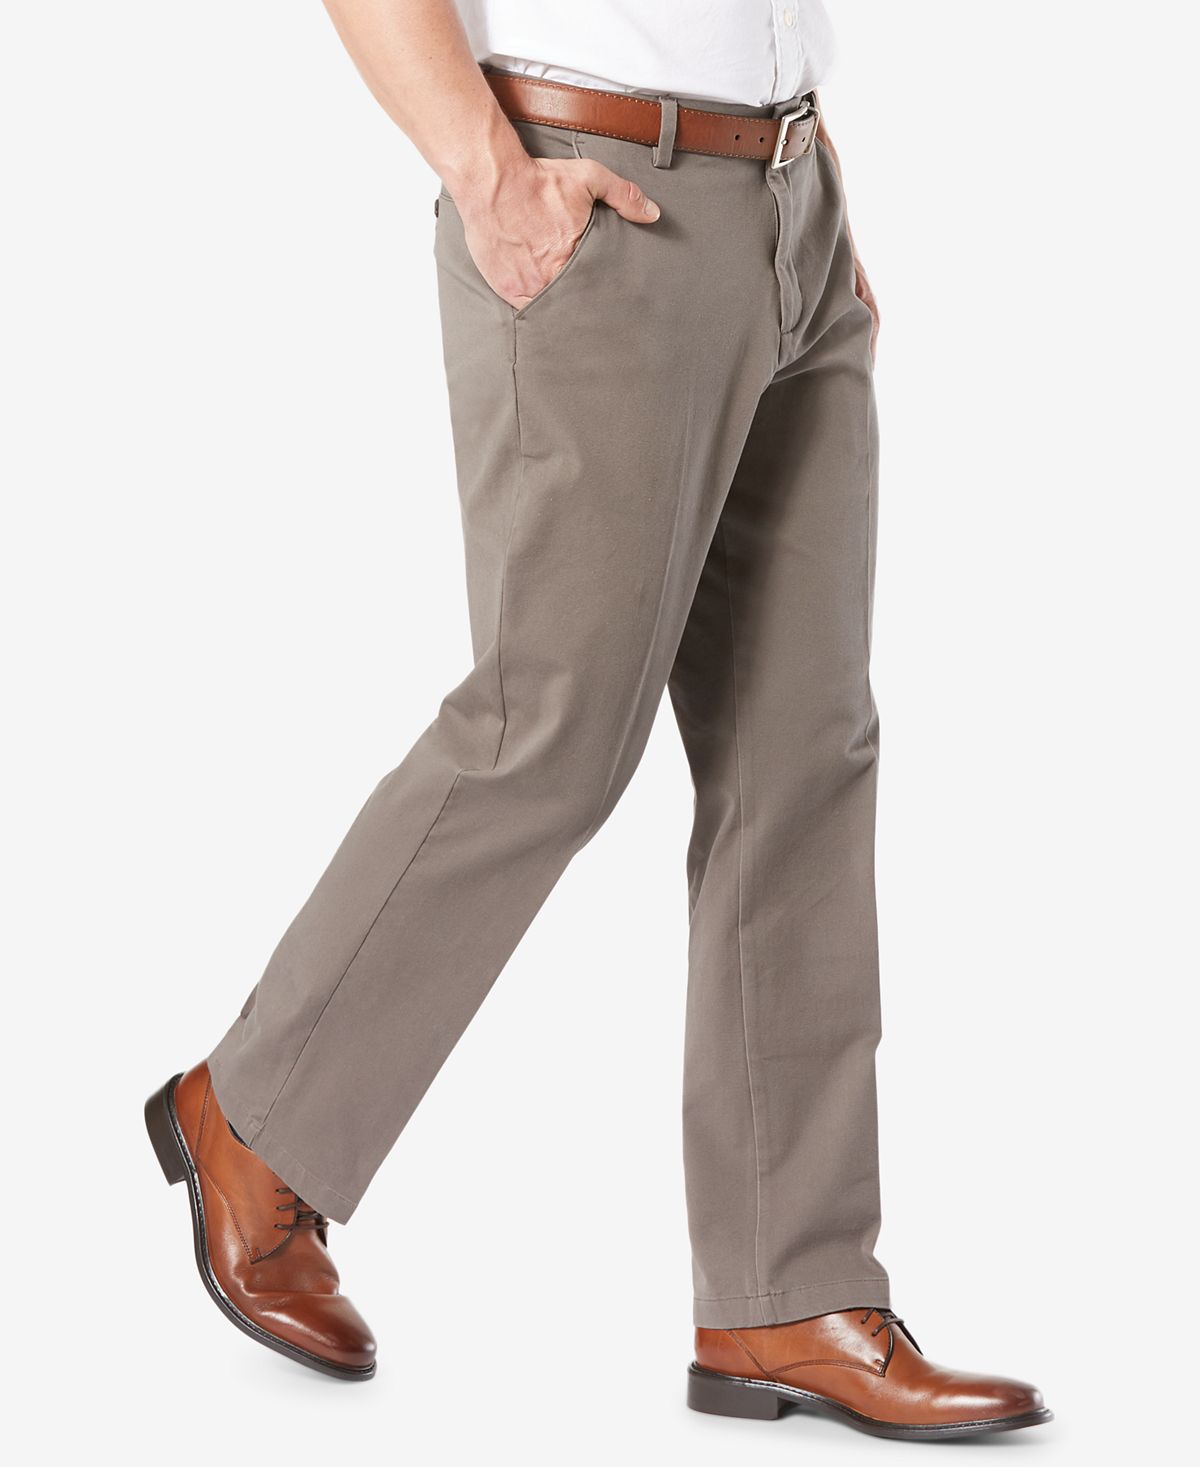 Dockers Workday Smart 360 Flex Classic Fit Khaki Stretch Pants Med Brown